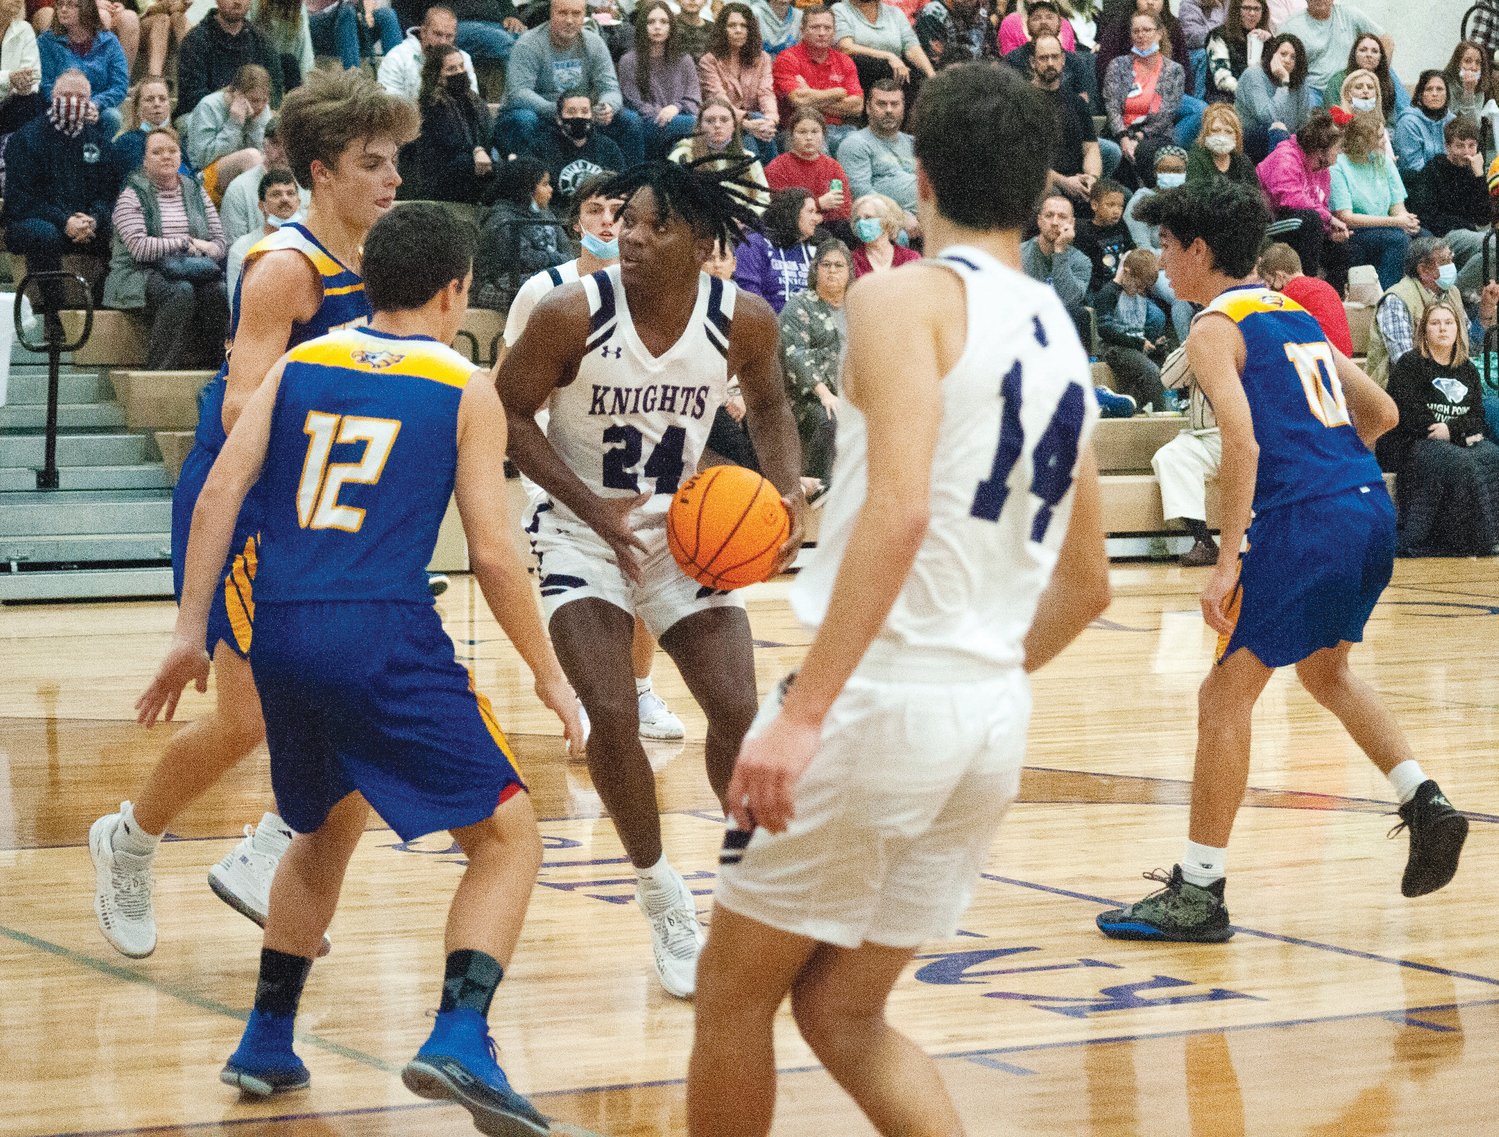 Chatham Charter junior Aamir Mapp (24) looks to drive into the paint in the Knights' 72-58 win over the Faith Christian Eagles on Nov. 16 in Siler City. Mapp was the team's leading scorer on the night with 16 points.